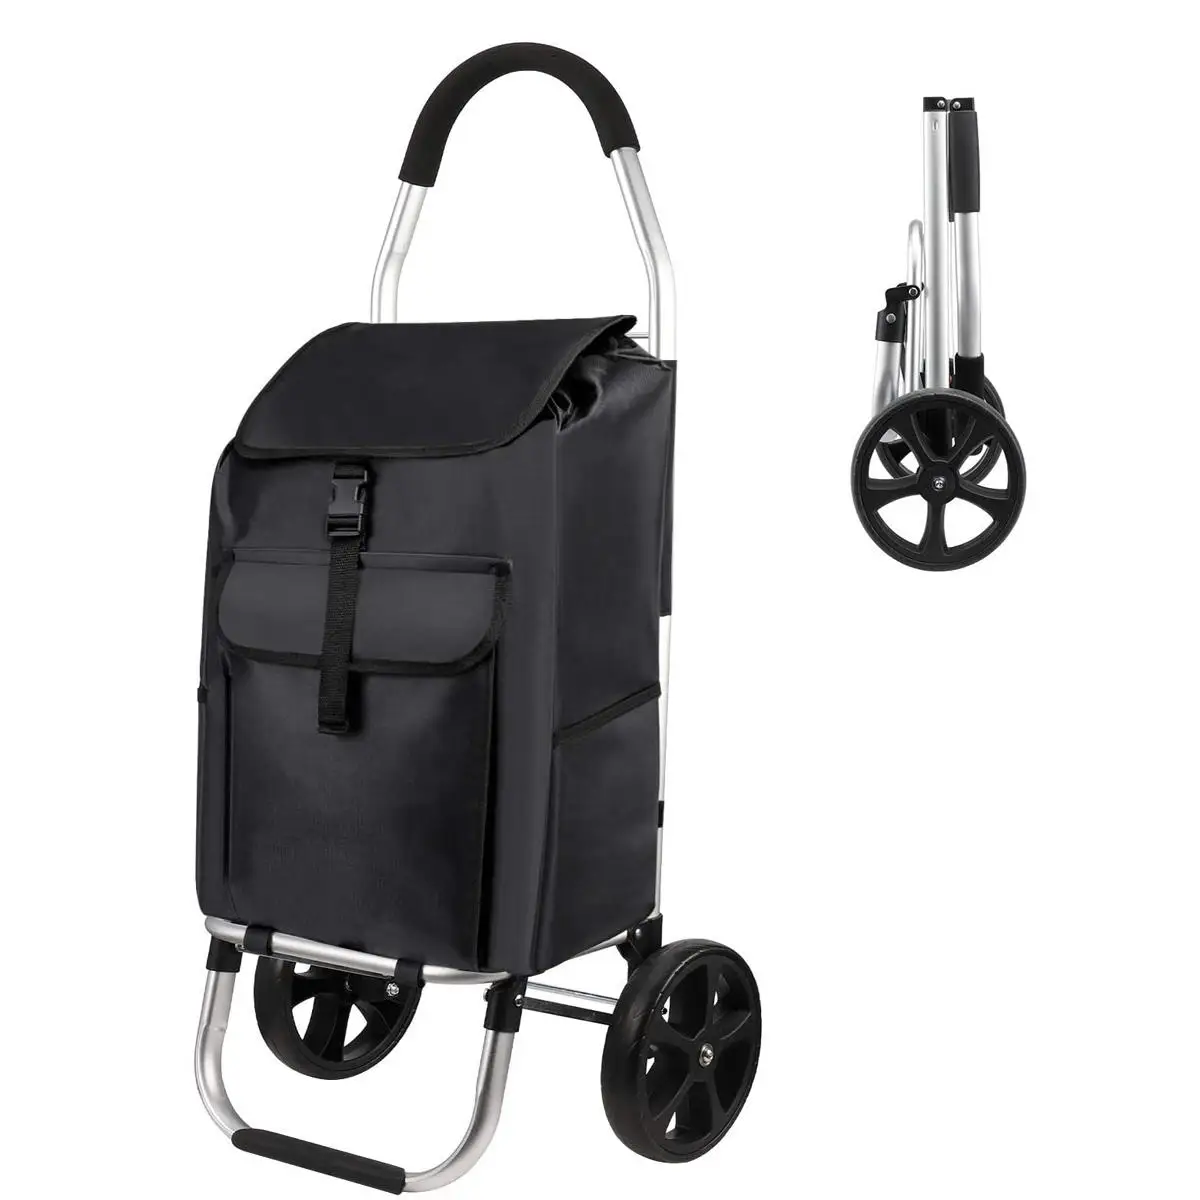 

2023 Fashion Large capacity foldable shopping cart shopping trolley bags on wheels with detachable bag